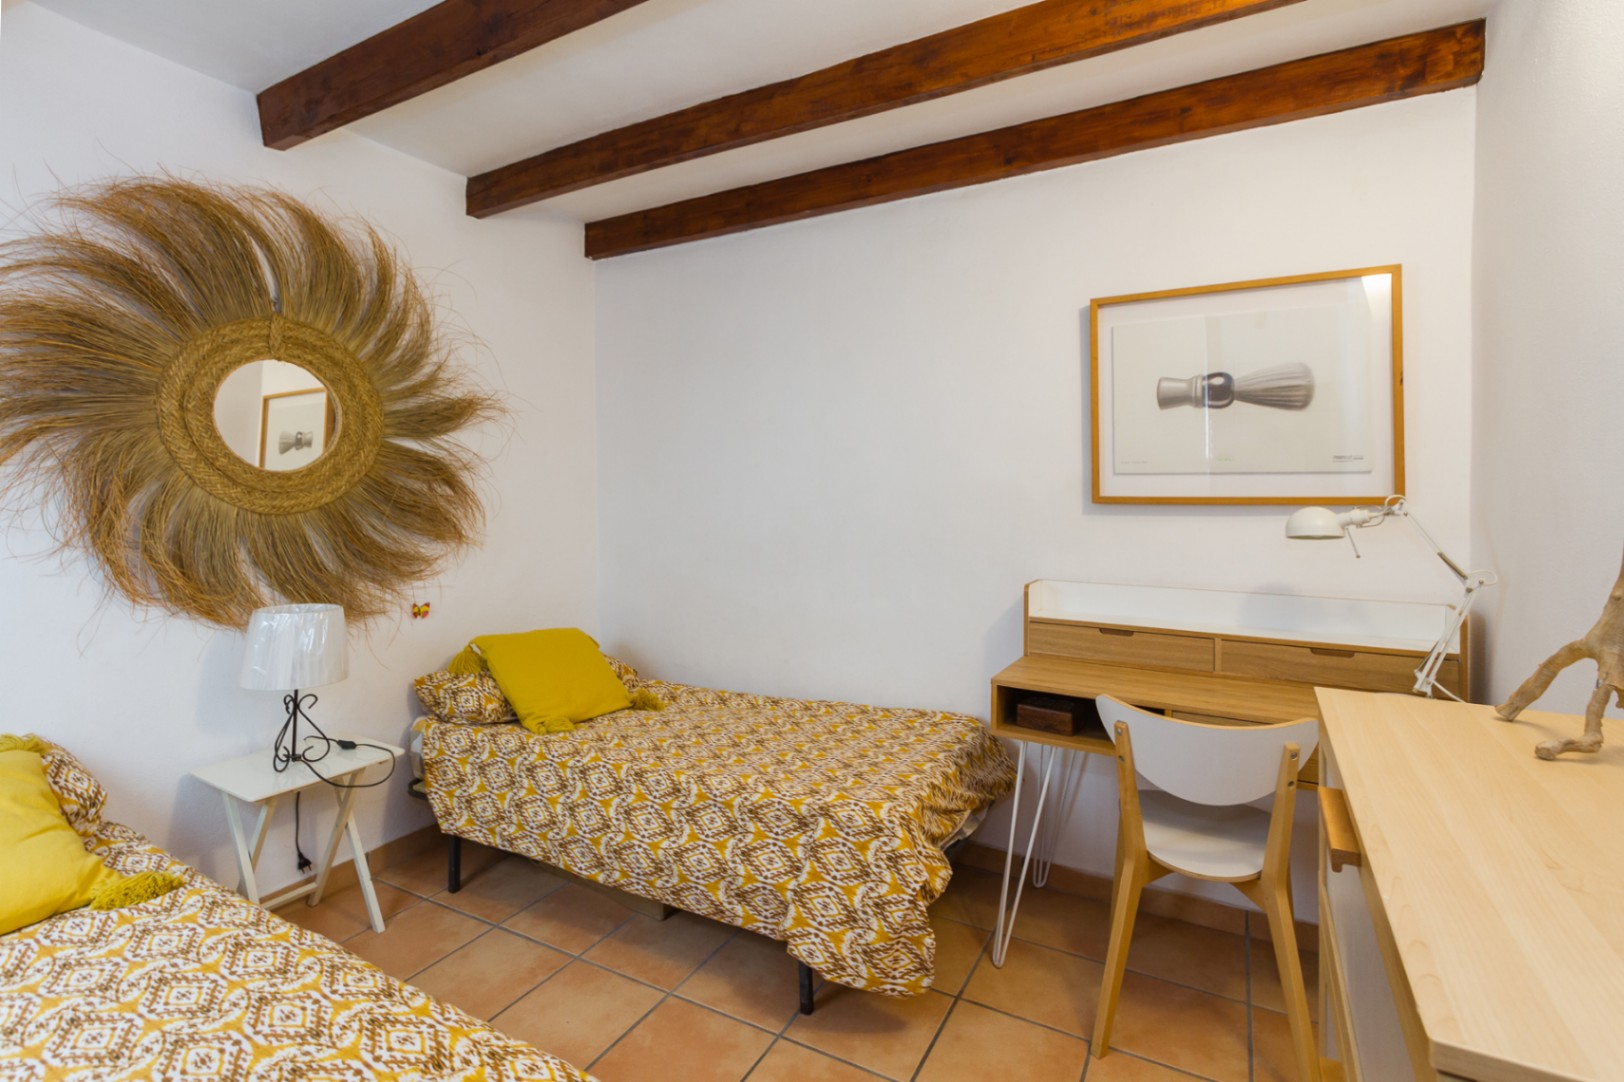 RUSTIC STYLE TOWN HOUSE IN JAVEA OLD TOWN